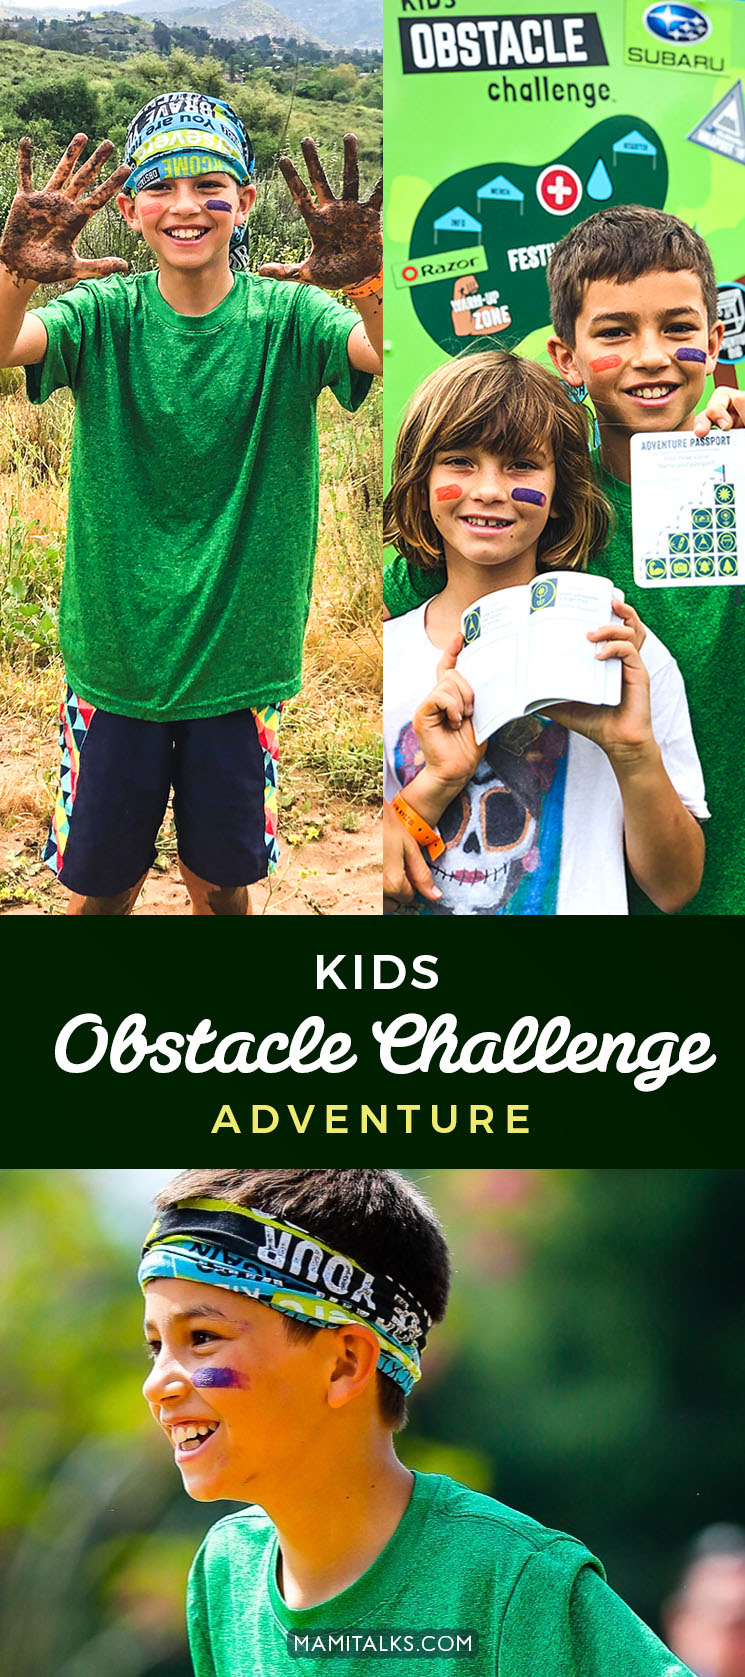 Obstacle Challenge adventure for kids and families. MamiTalks.com